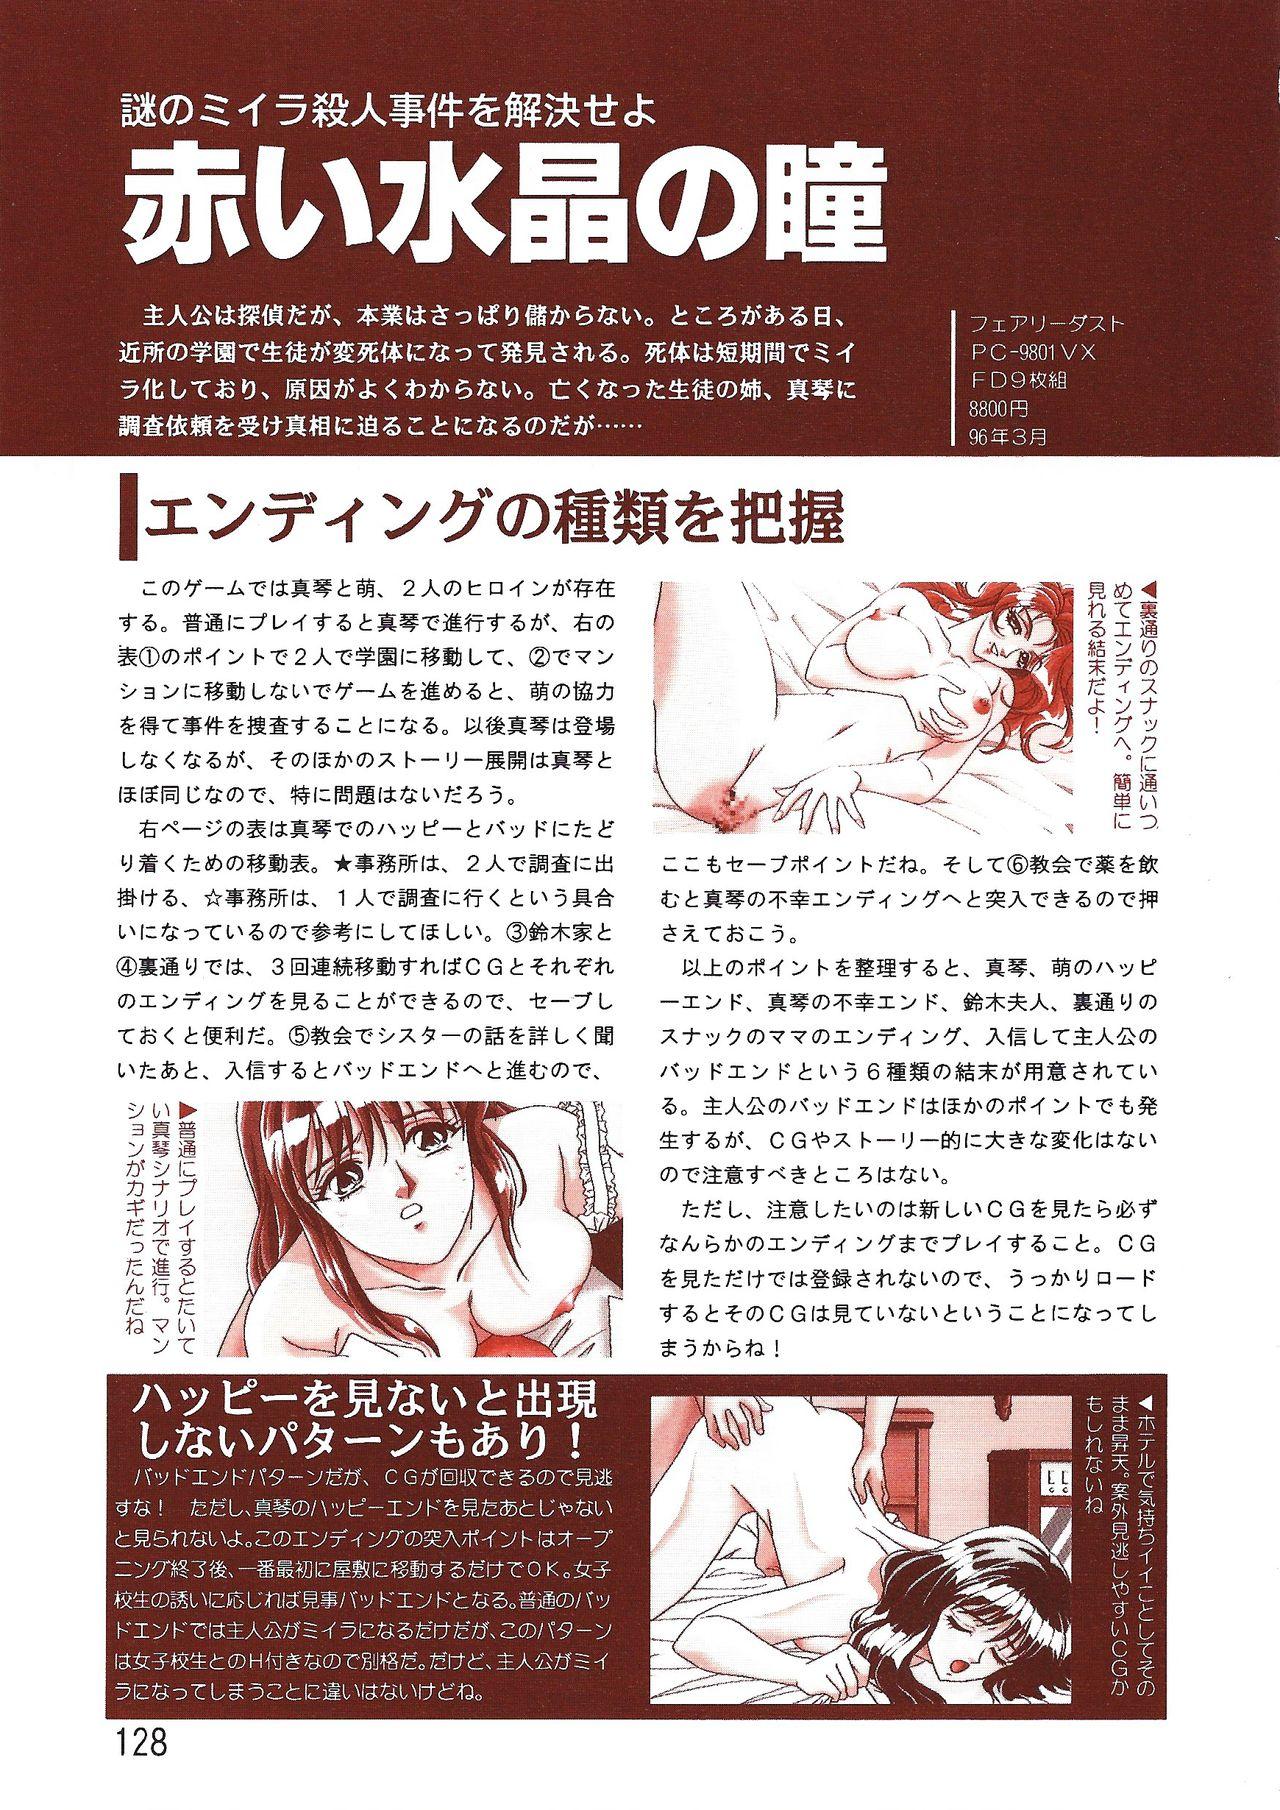 PC Bishoujo Software Strategy Book: Strategy King 2 127